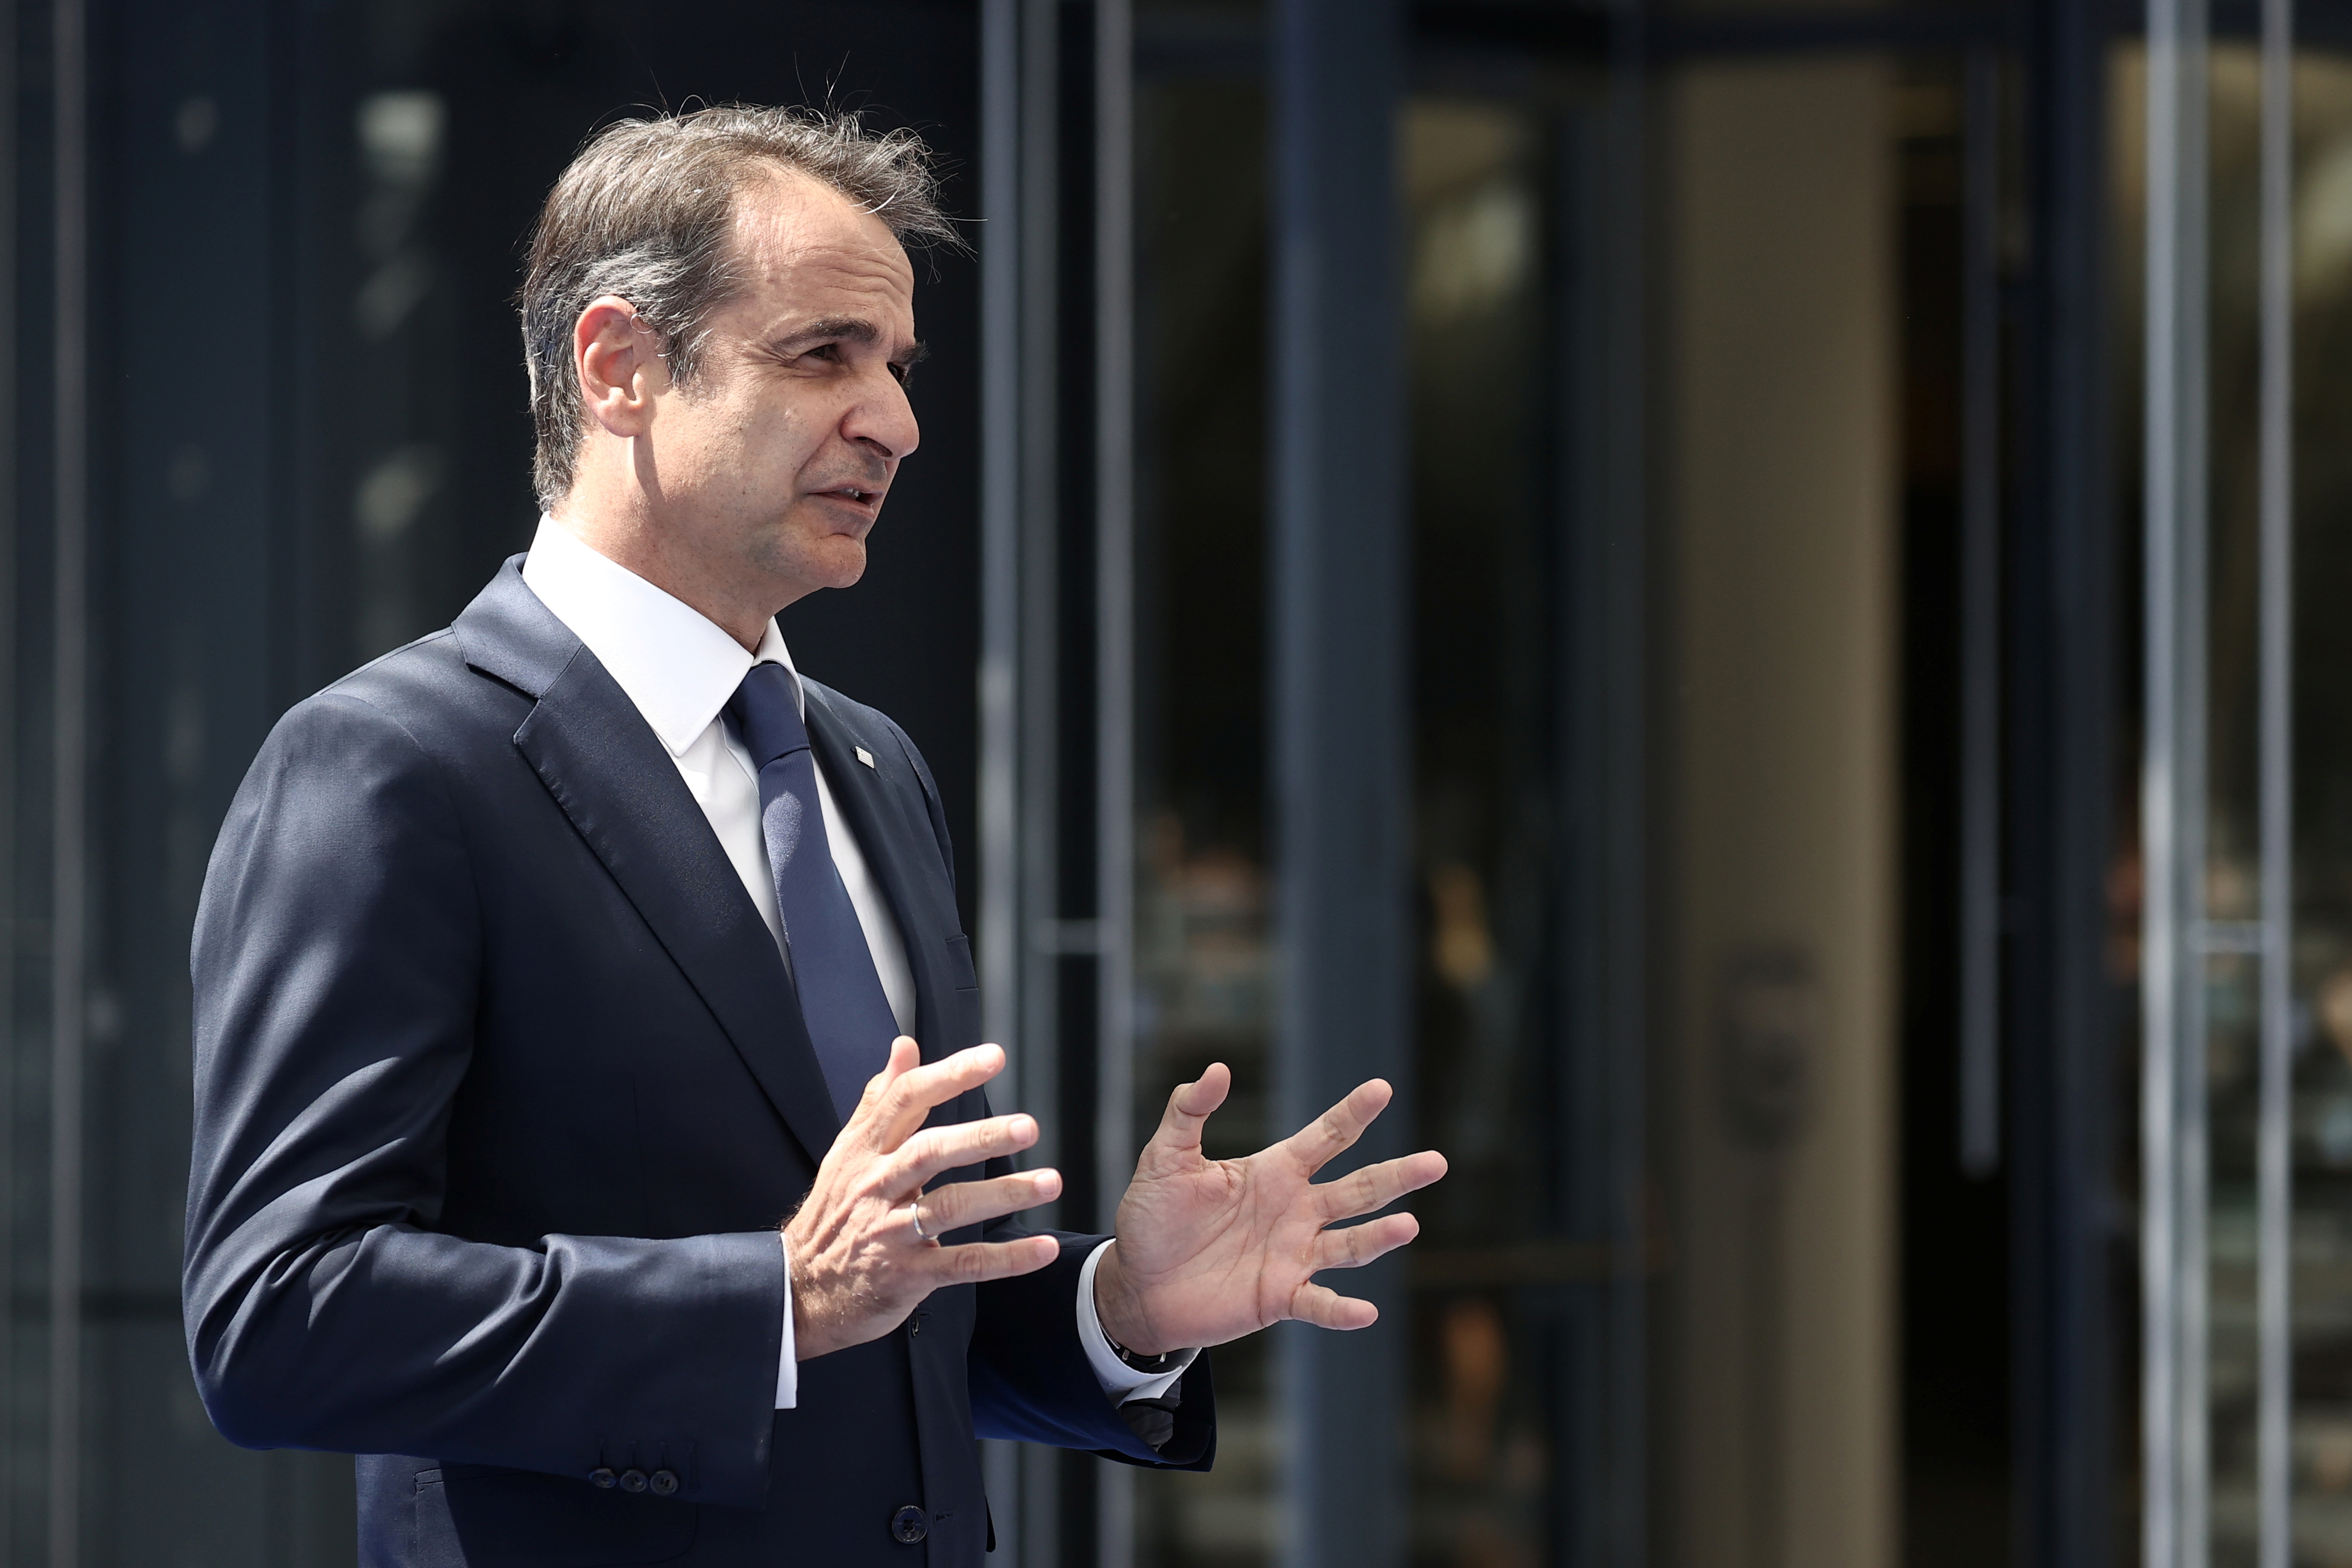 Greece's Prime Minister Kyriakos Mitsotakis arrives for the NATO summit at the Alliance's headquarters, in Brussels, Belgium, June 14, 2021. Kenzo Tribouillard/Pool via REUTERS